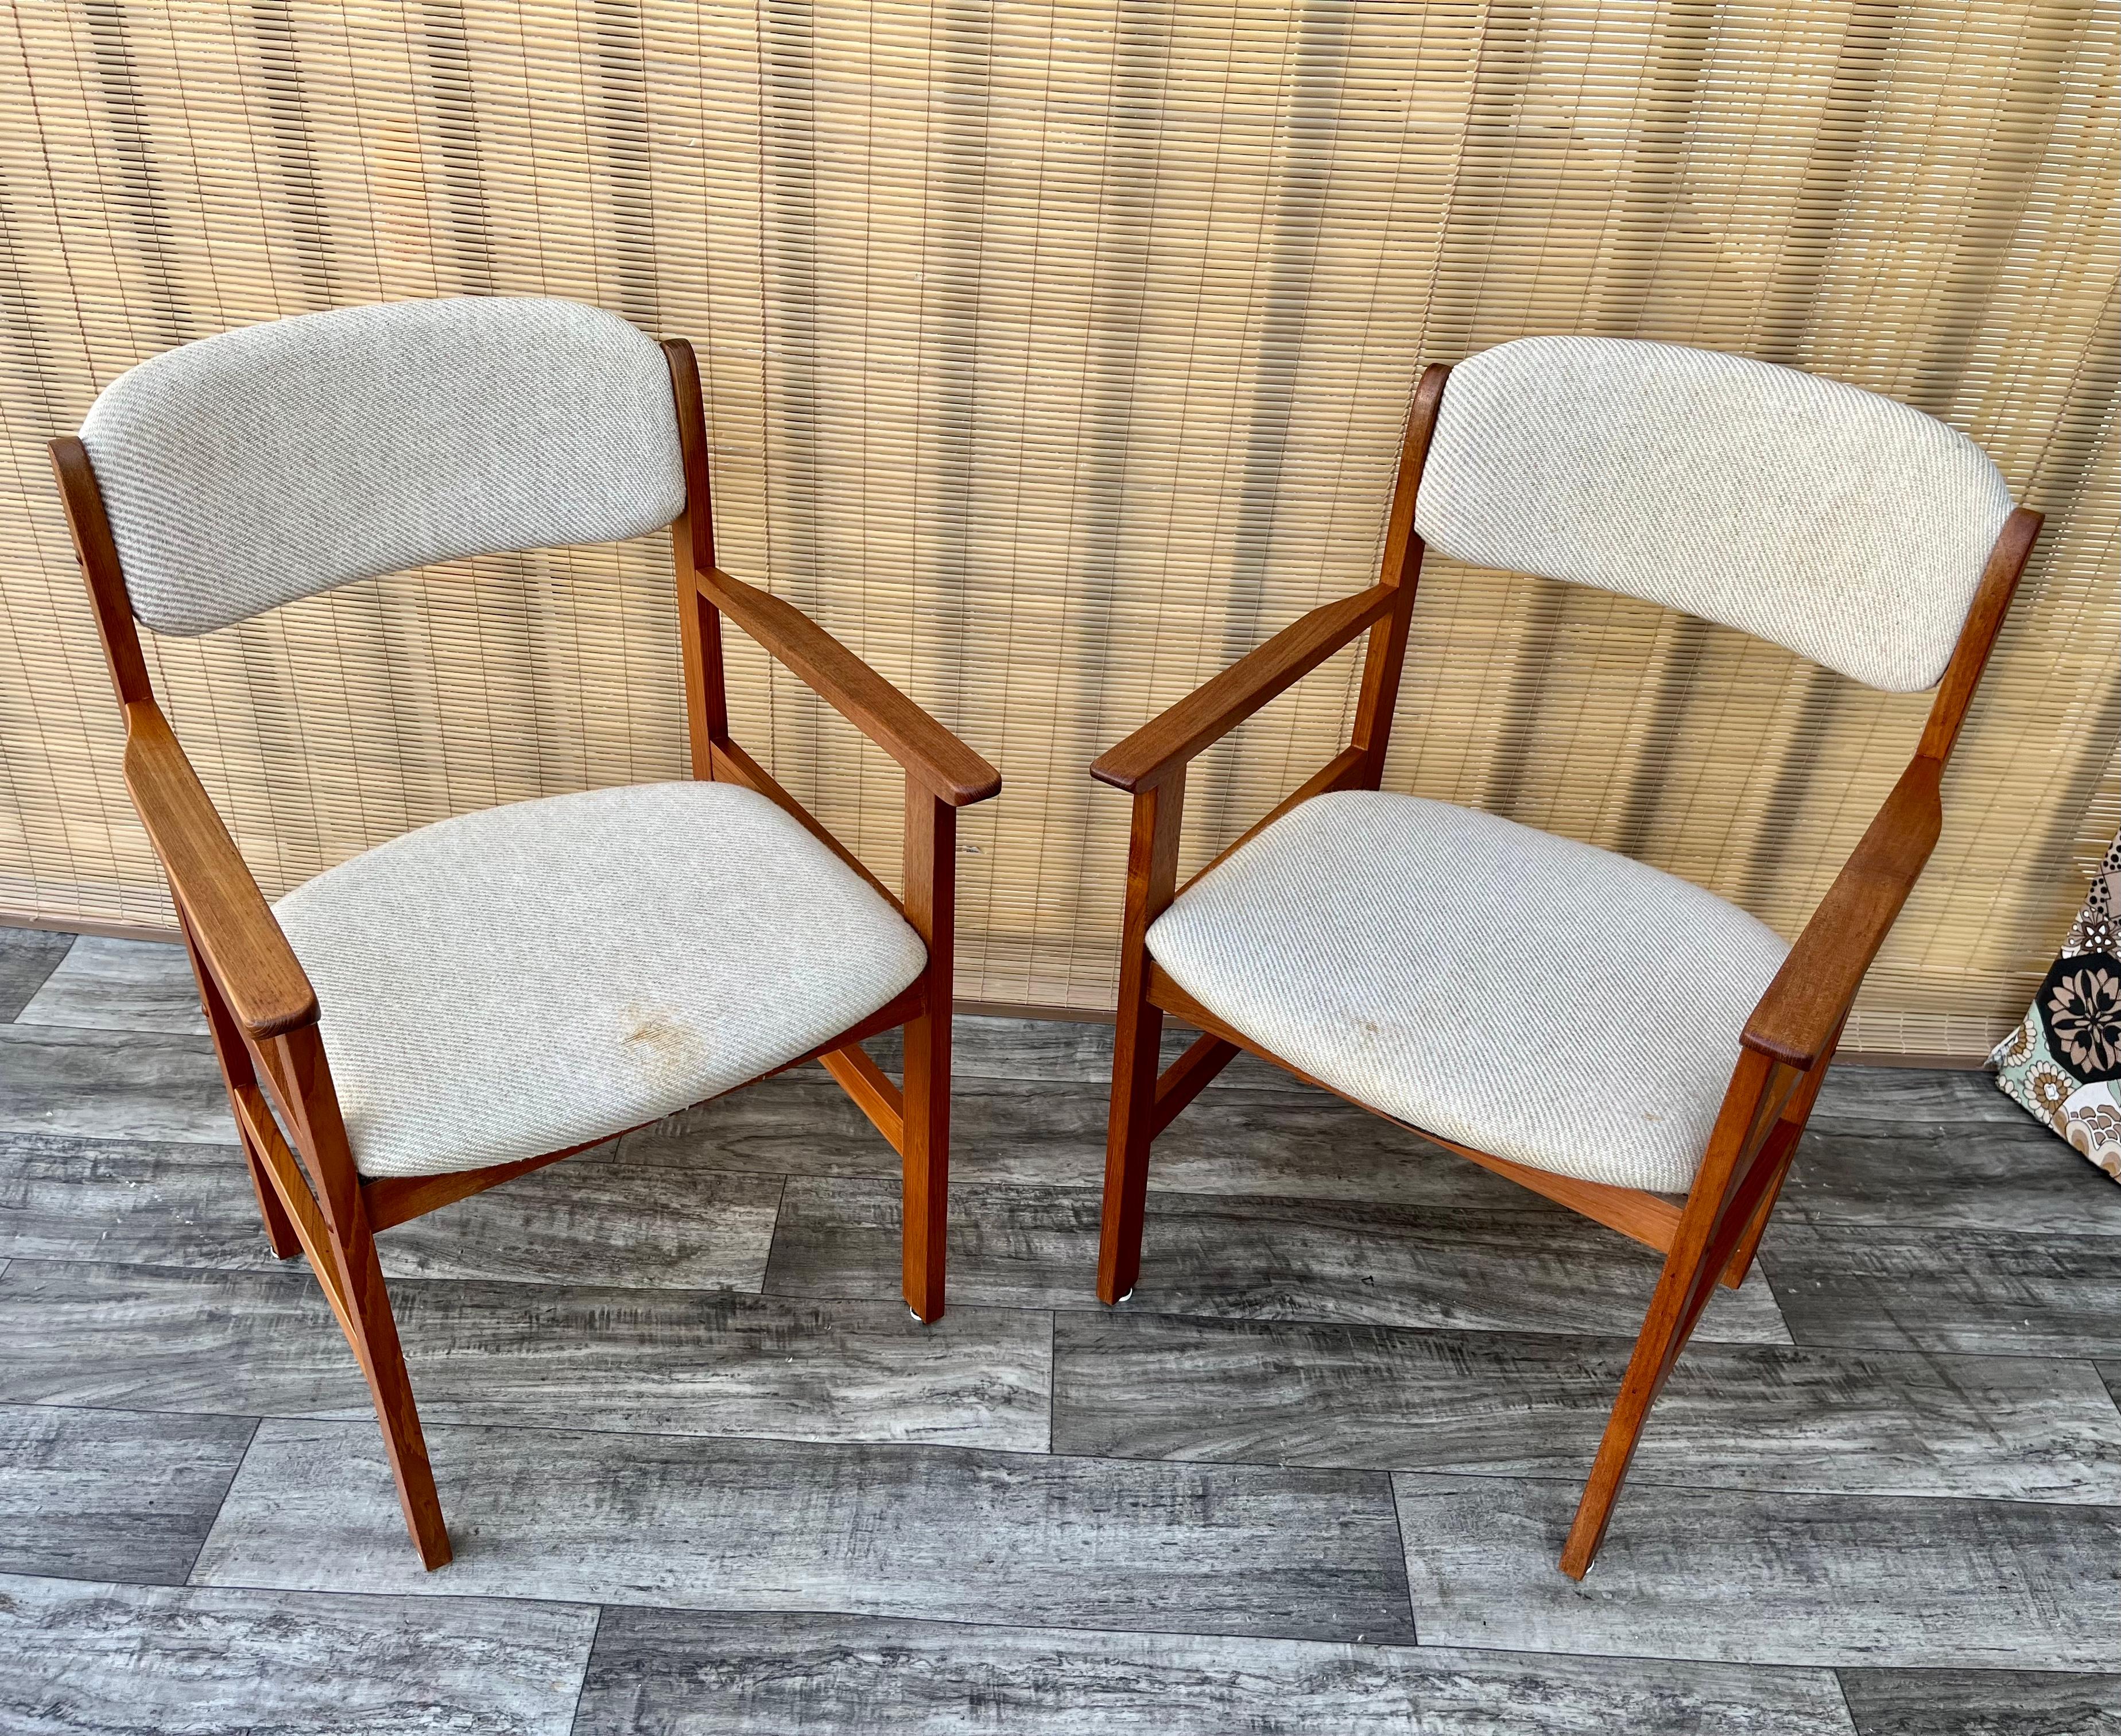 Scandinavian Modern 1980s Mid-Century Danish Modern Style Captain Chairs by Benny Linden Design. For Sale